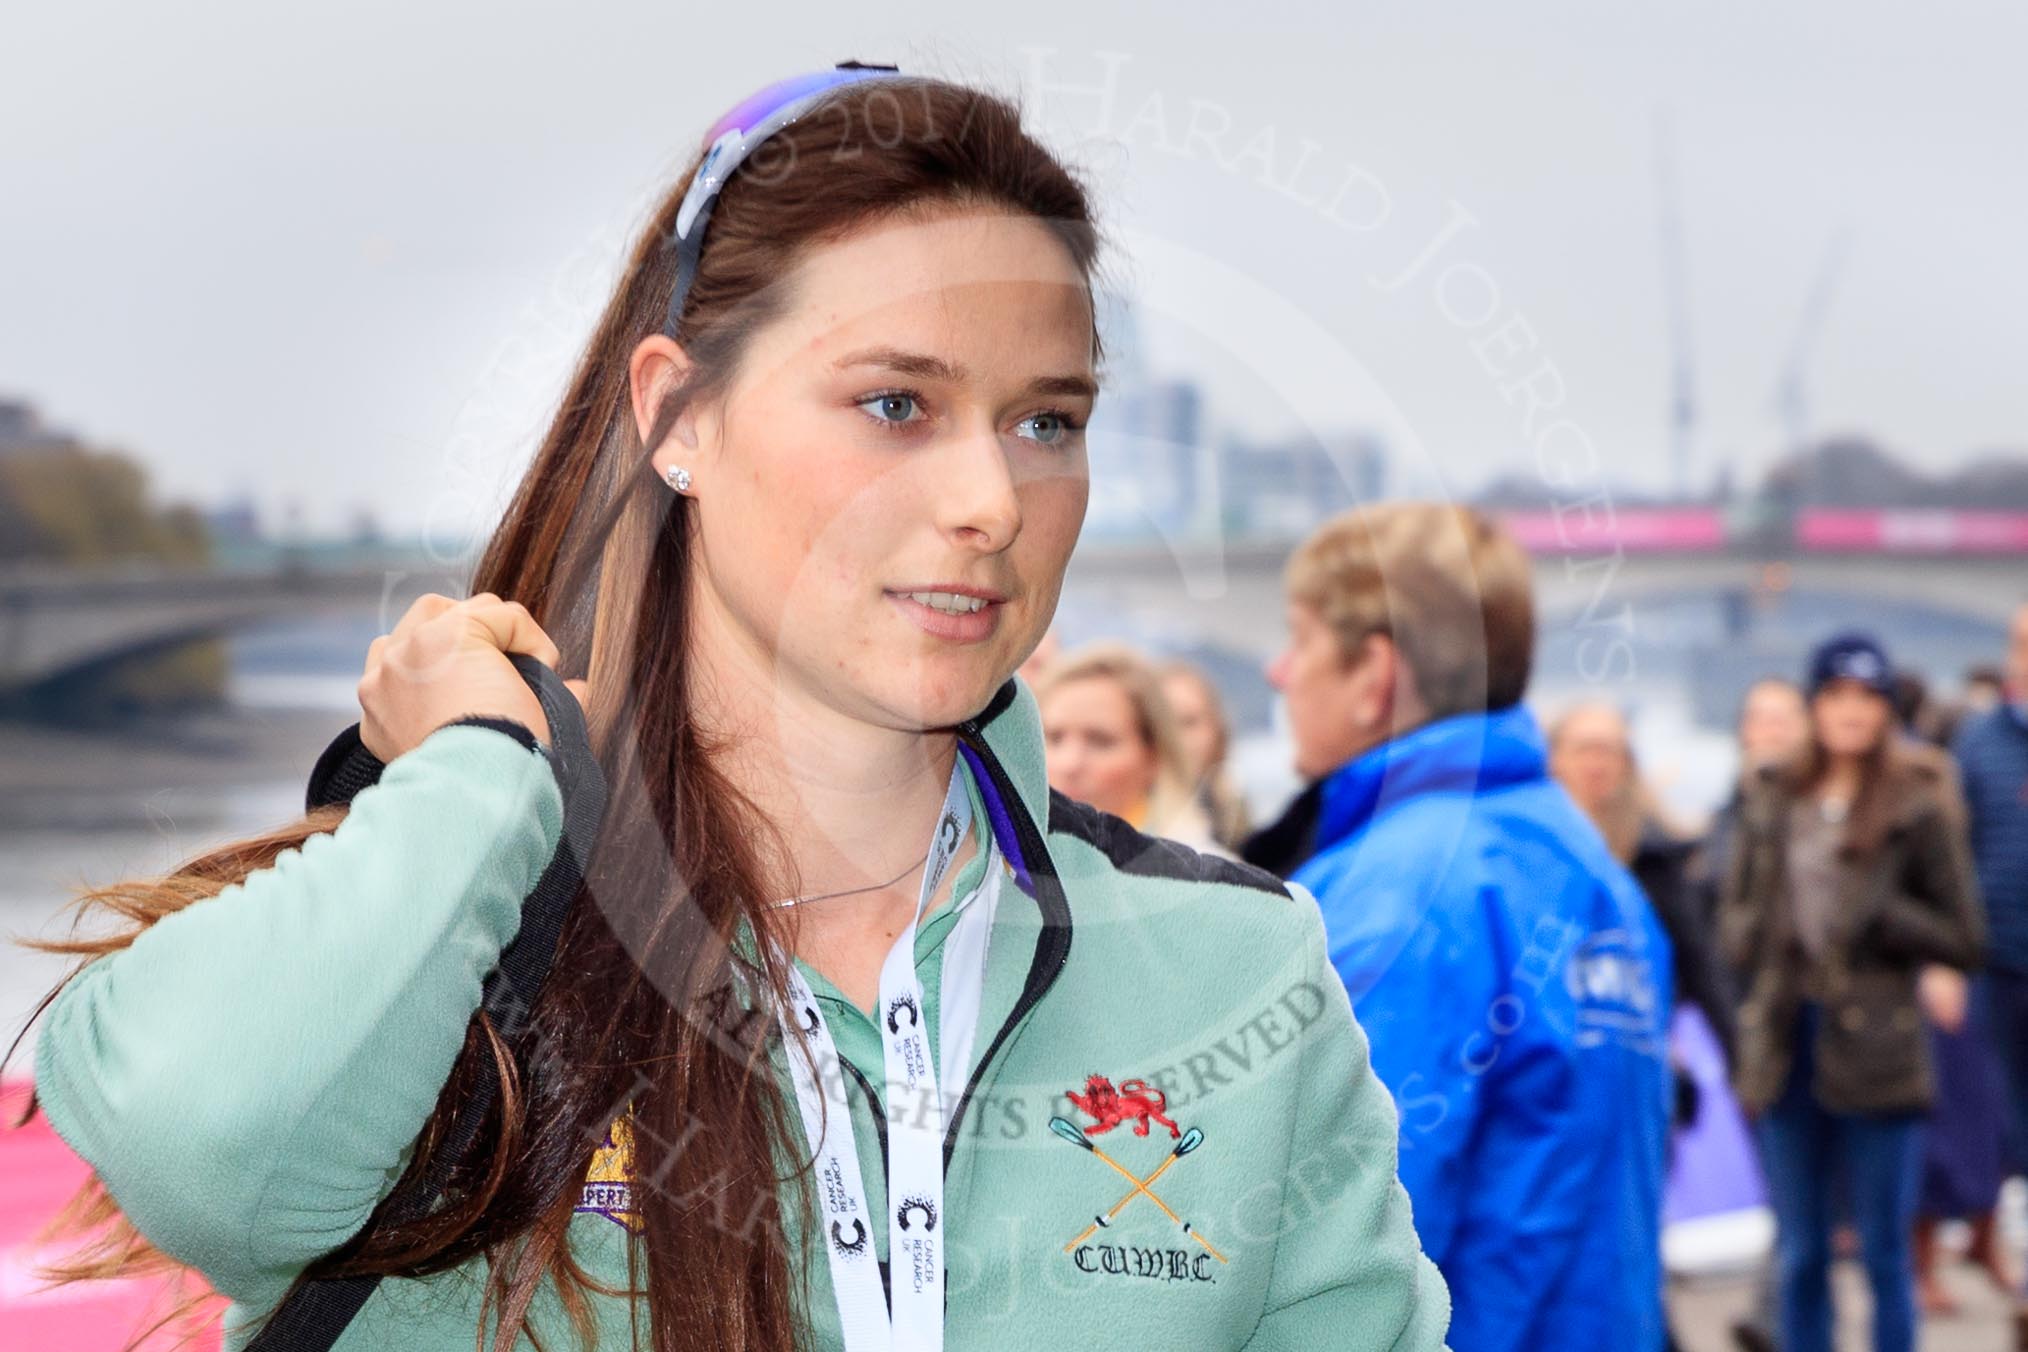 The Cancer Research UK Women's Boat Race 2018: Cambridge 4 seat Thea Zabell arriving at the boathouses before the race.
River Thames between Putney Bridge and Mortlake,
London SW15,

United Kingdom,
on 24 March 2018 at 13:54, image #12